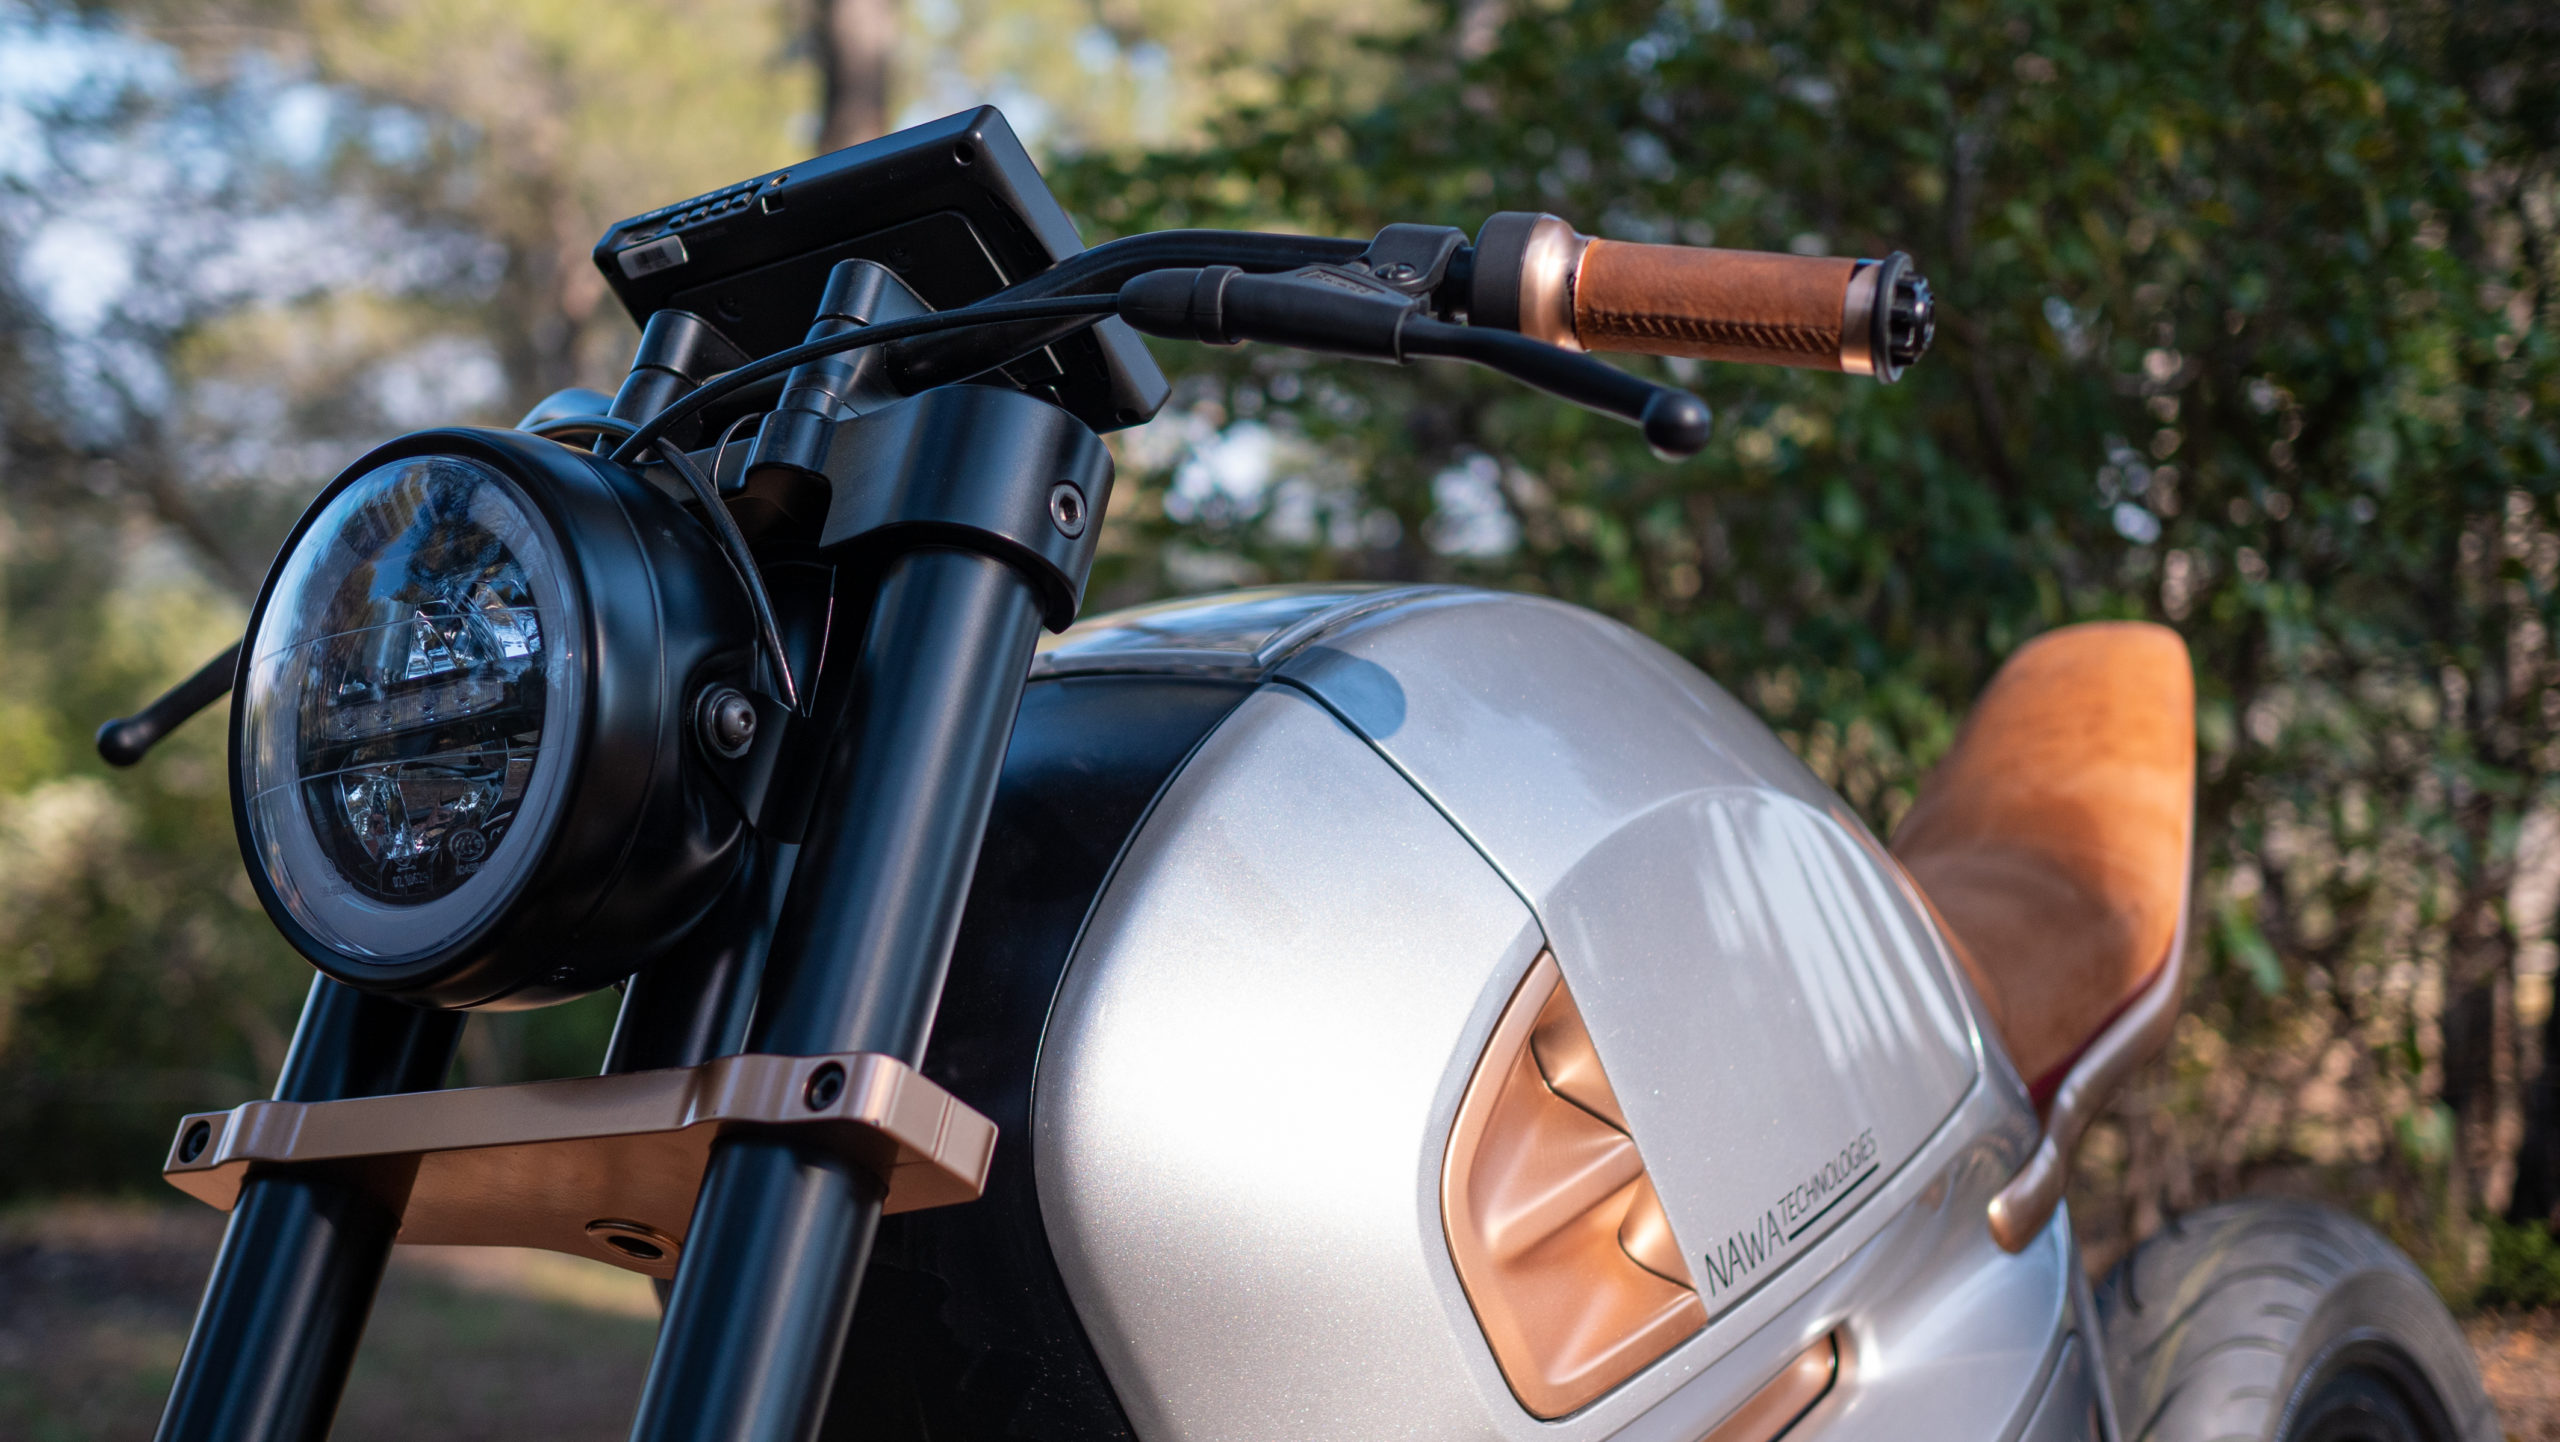 A view of the world's first hybrid electric motorcycle, available from NAWA and debuting as an electric motorbike concept for 2021 EICMA: Press release media, side front view, close-up